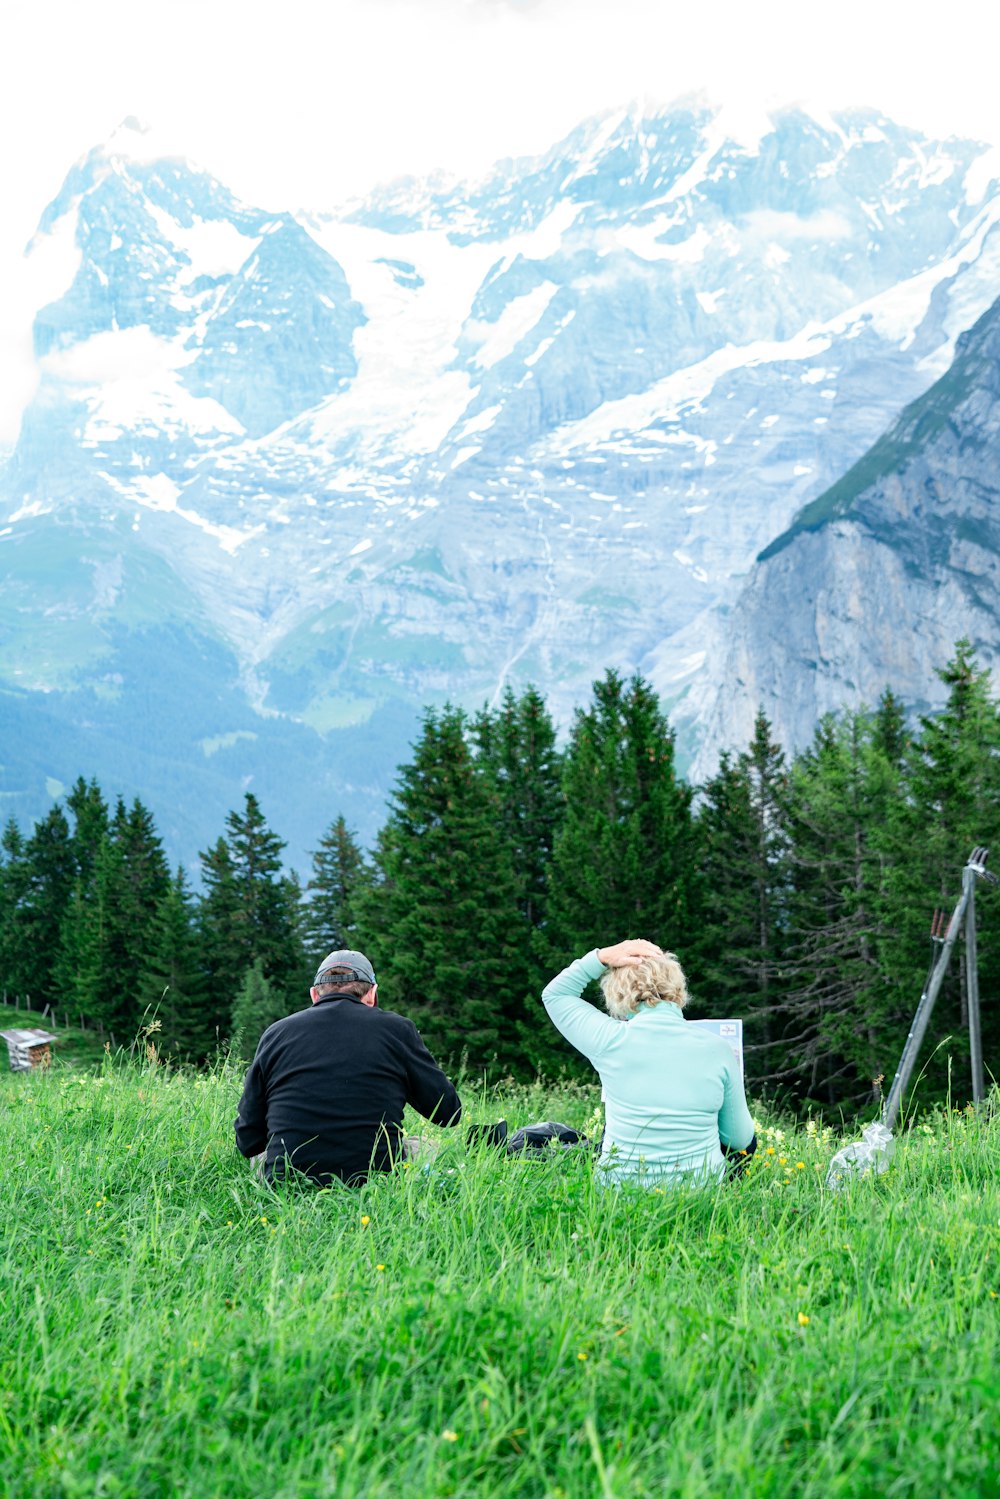 man and woman sitting on grass field near green trees and mountain during daytime